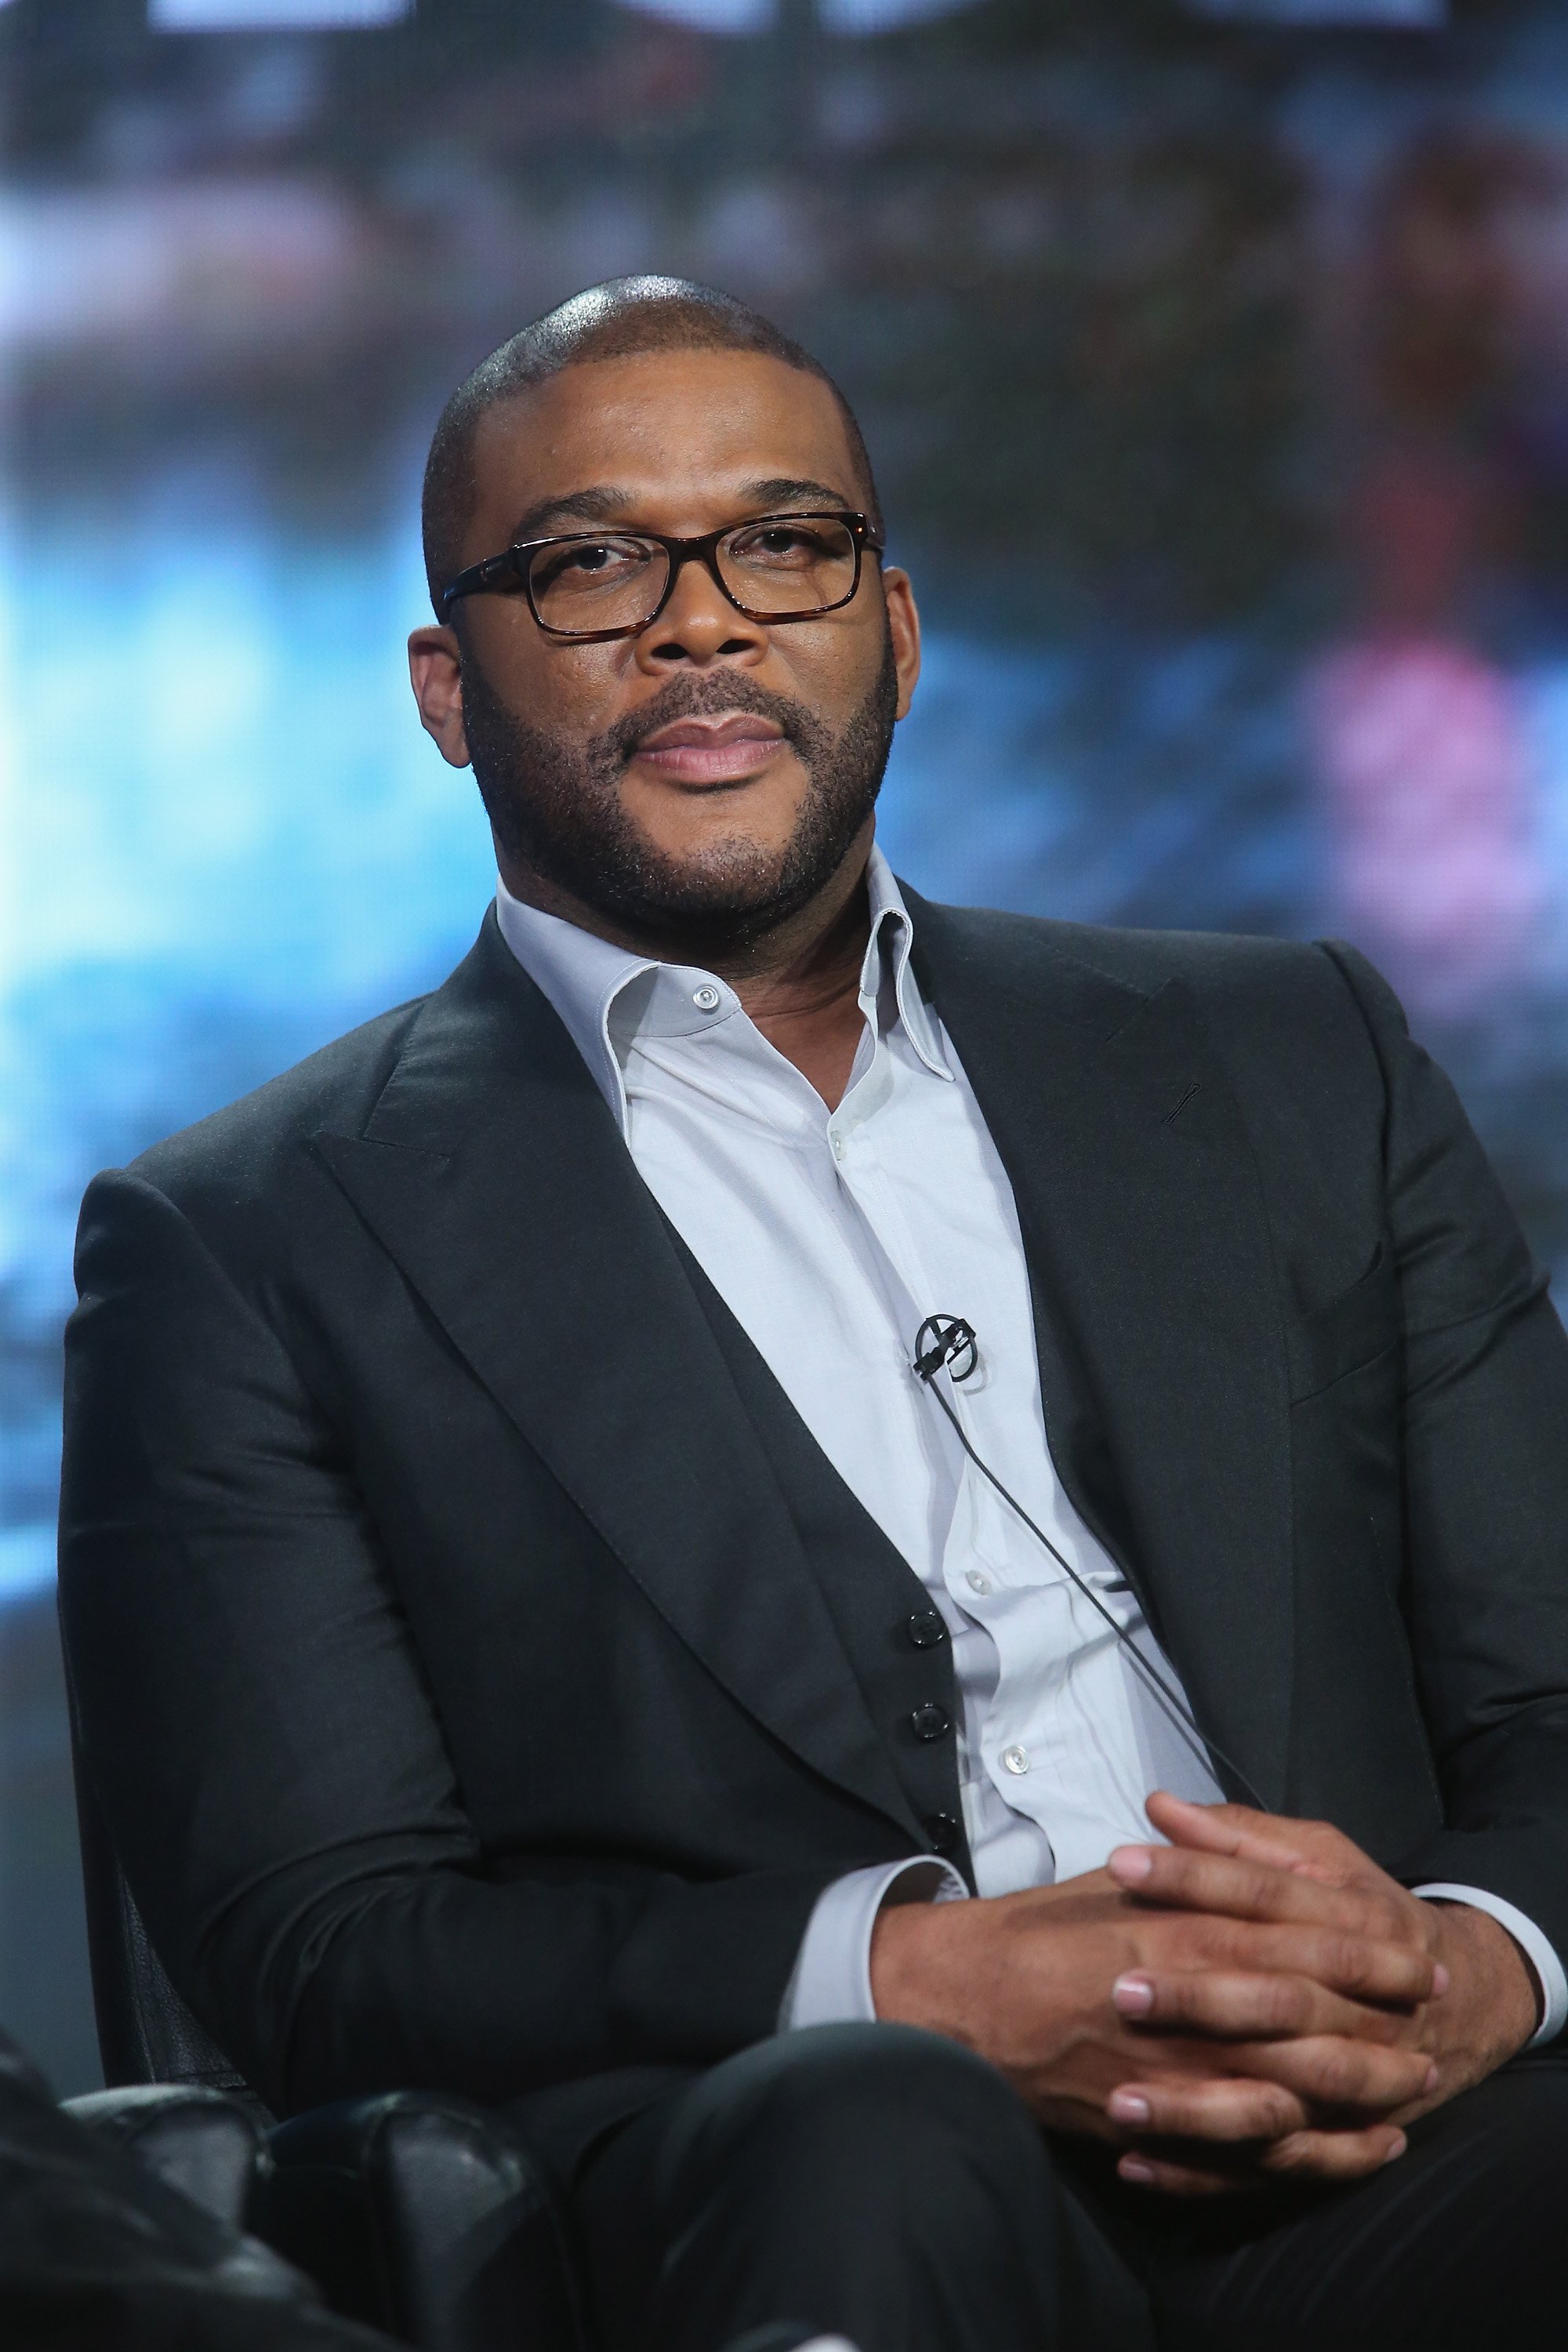 Tyler Perry at a panel discussion during the Winter TCA Tour in Pasadena in January 2016. | Photo: Getty Images